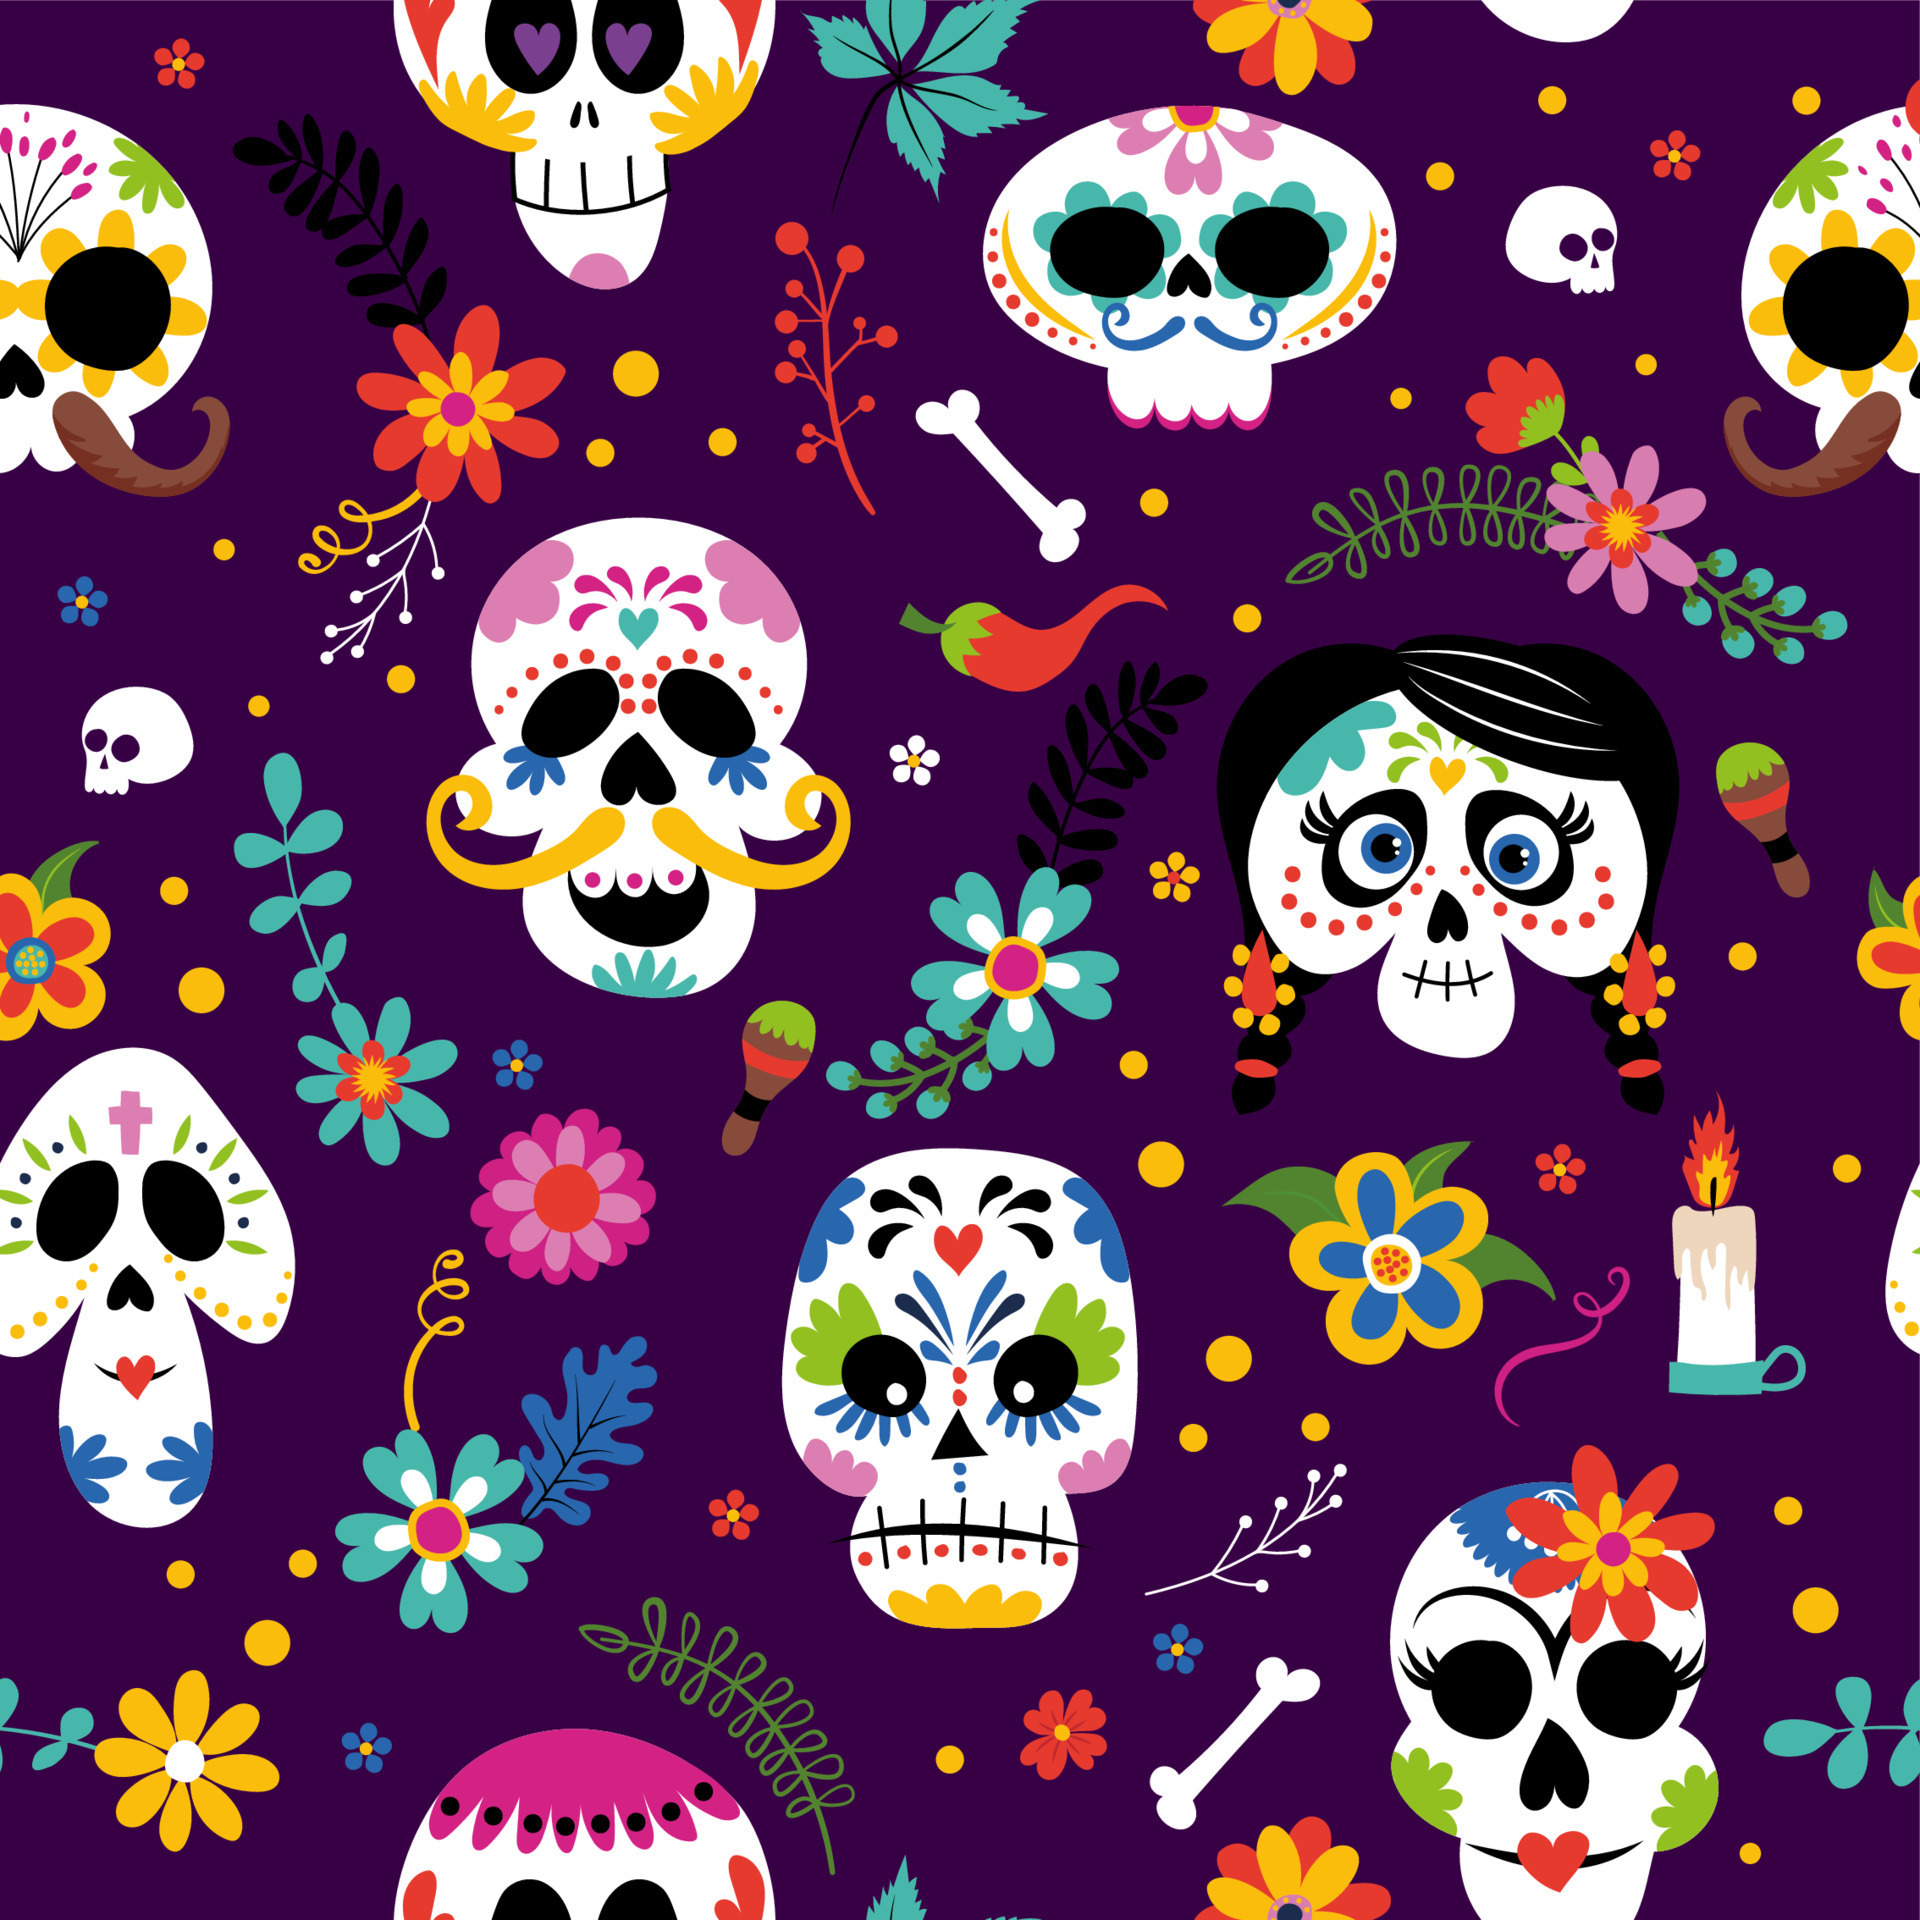 Premium Photo  Beautiful illustration of the day of the dead